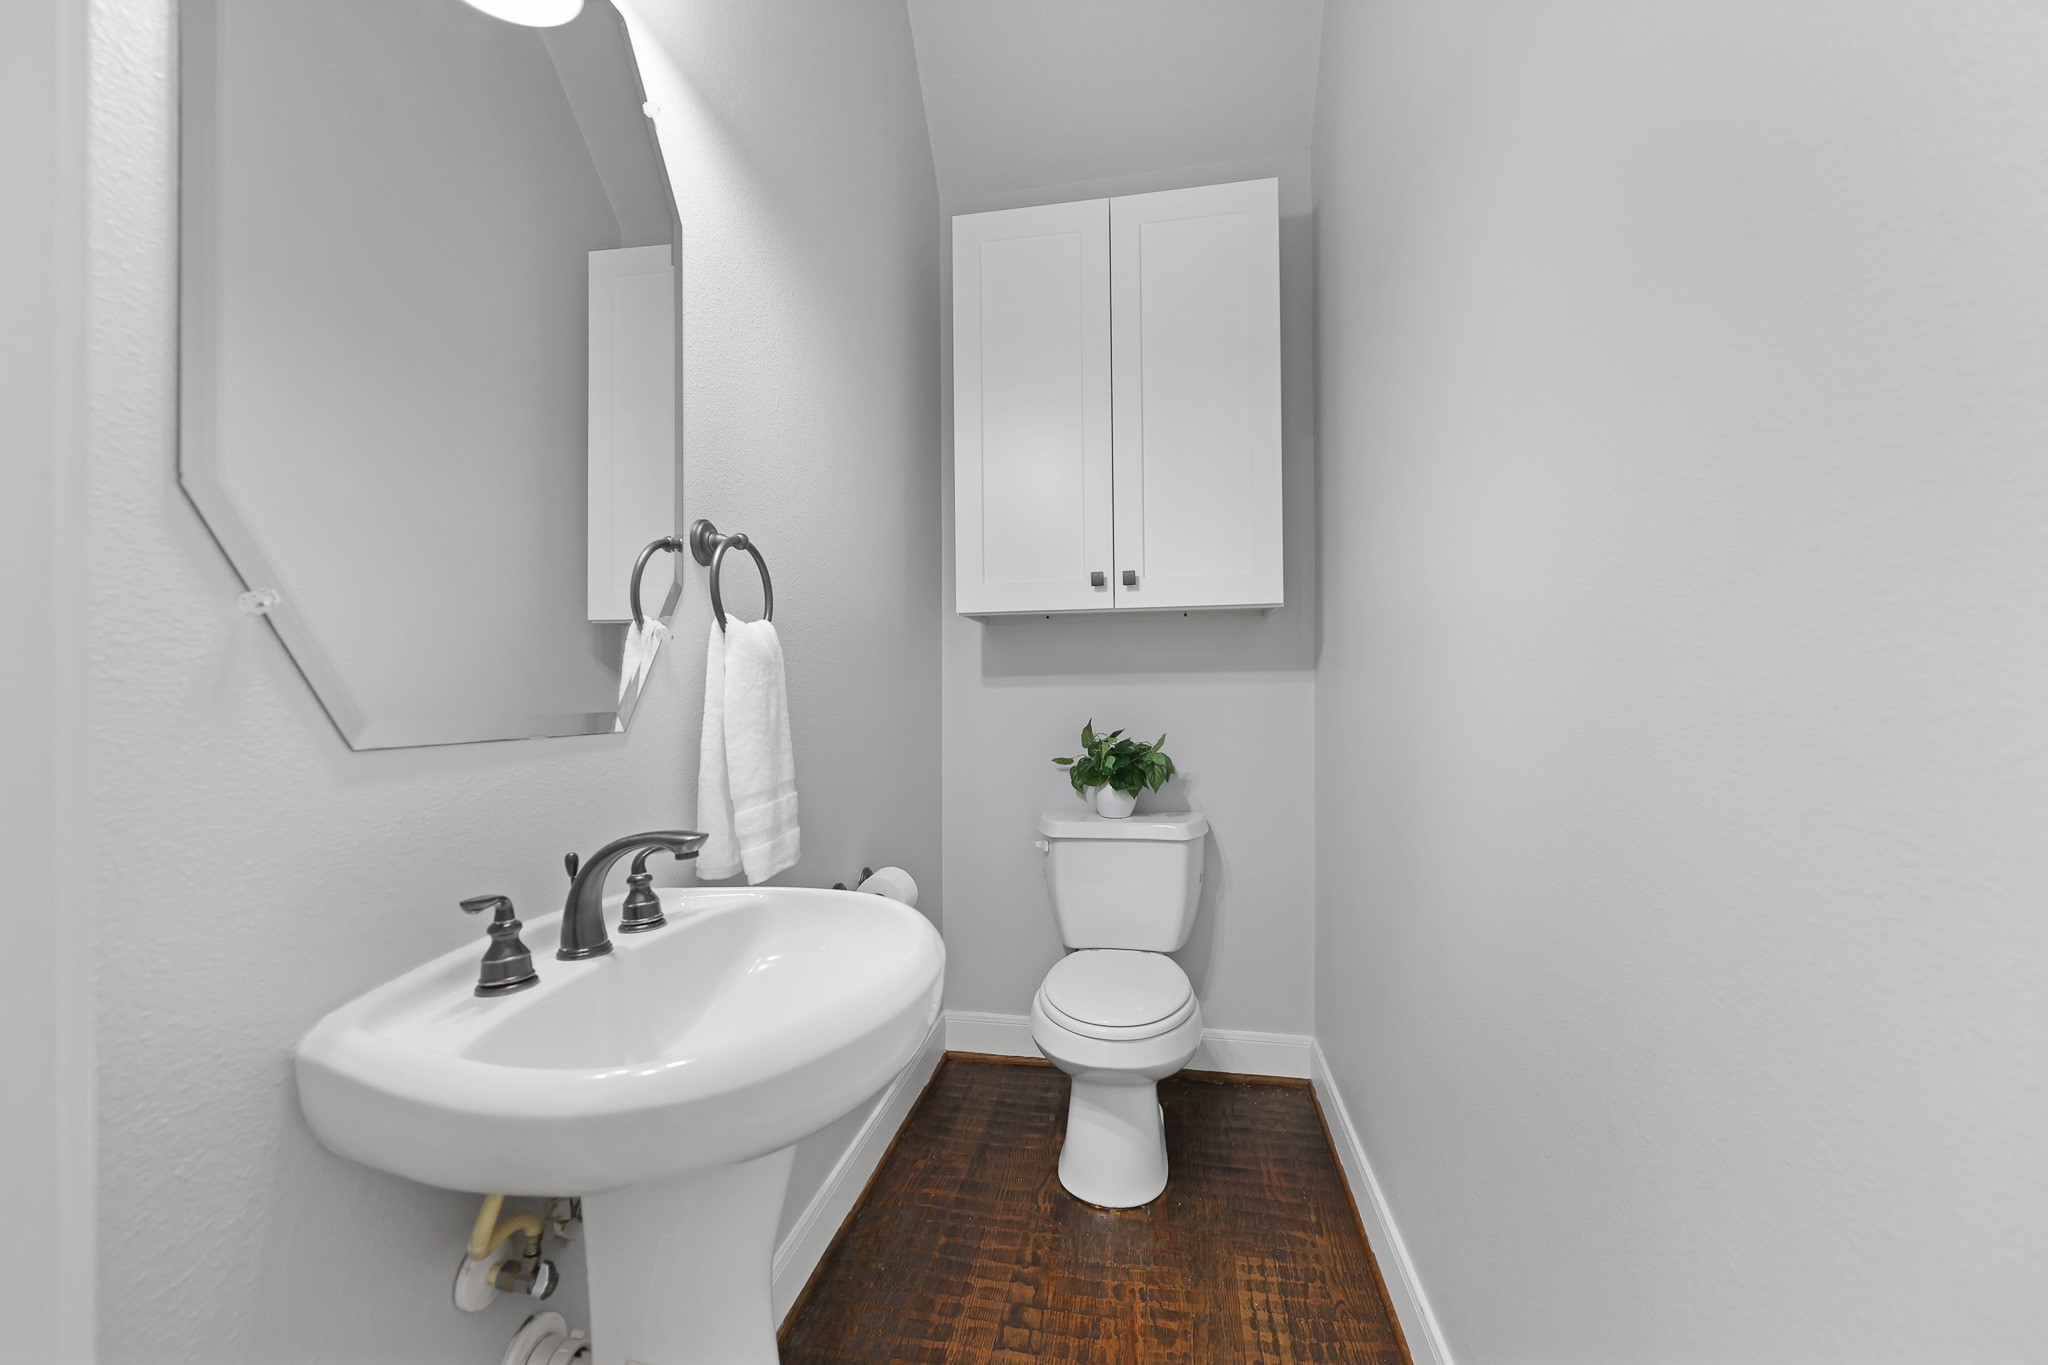 THE POWDER ROOM IS PERFECT FOR GUESTS WITH PEDESTAL SINK AND USEFUL ADDITIONAL CABINETS.